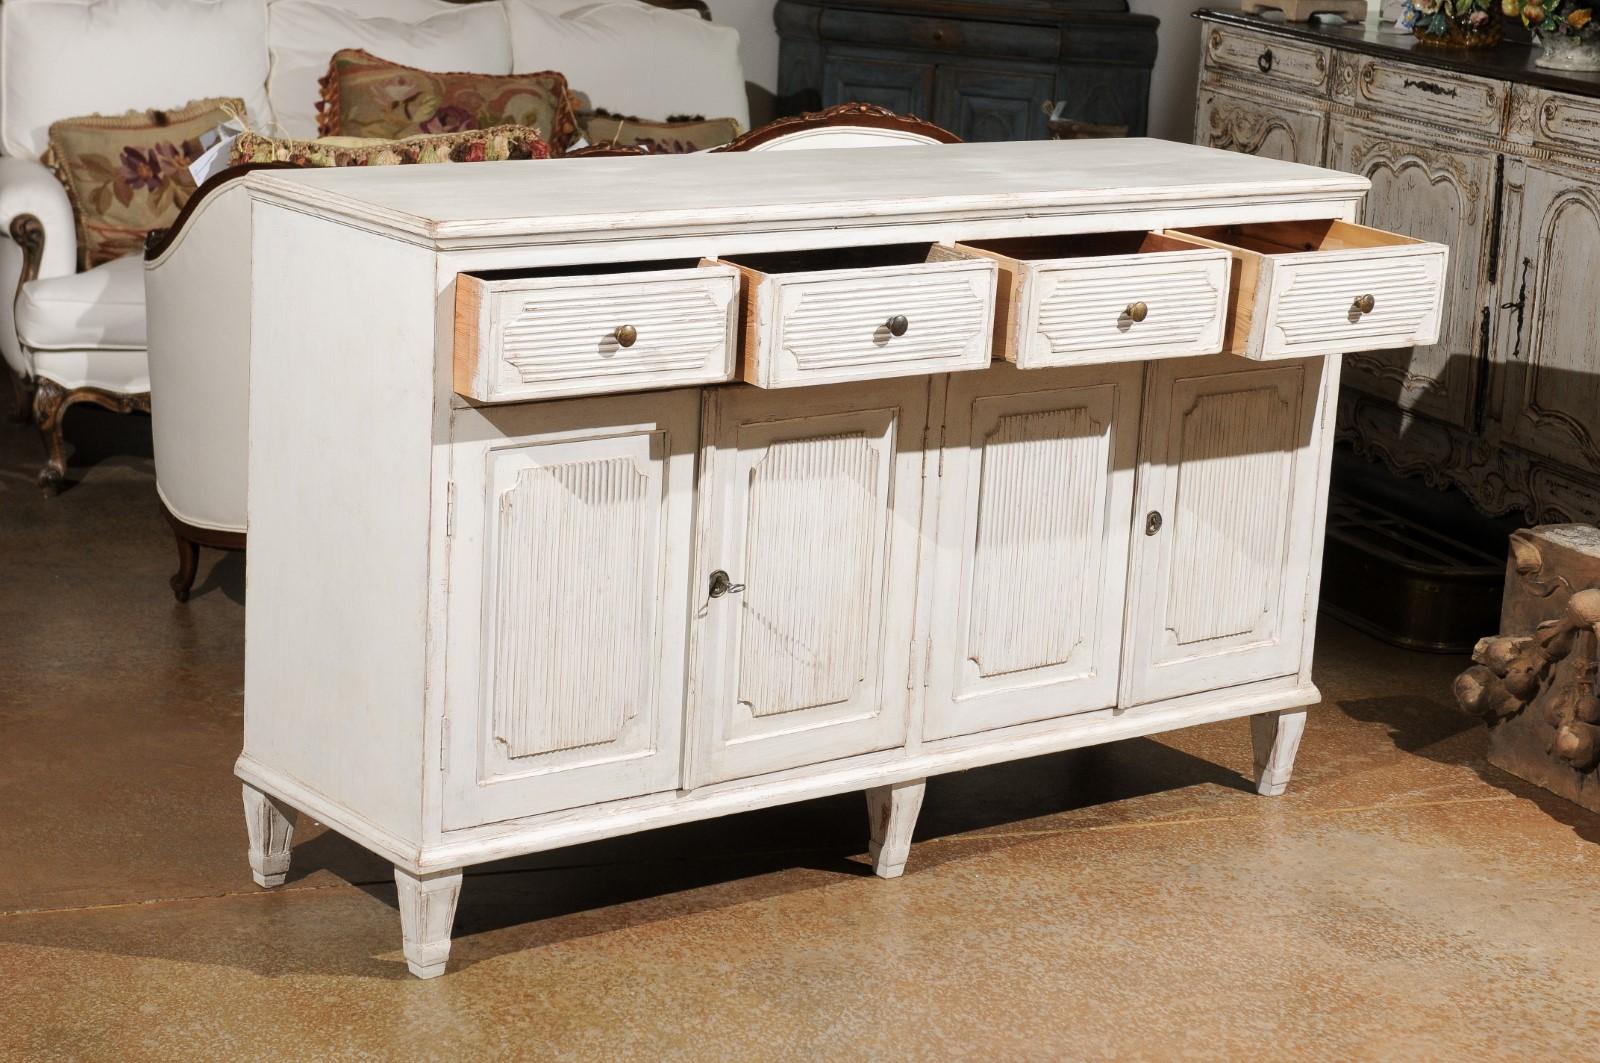 Wood Swedish Gustavian Style Painted Sideboard with Reeded Motifs, Doors and Drawers